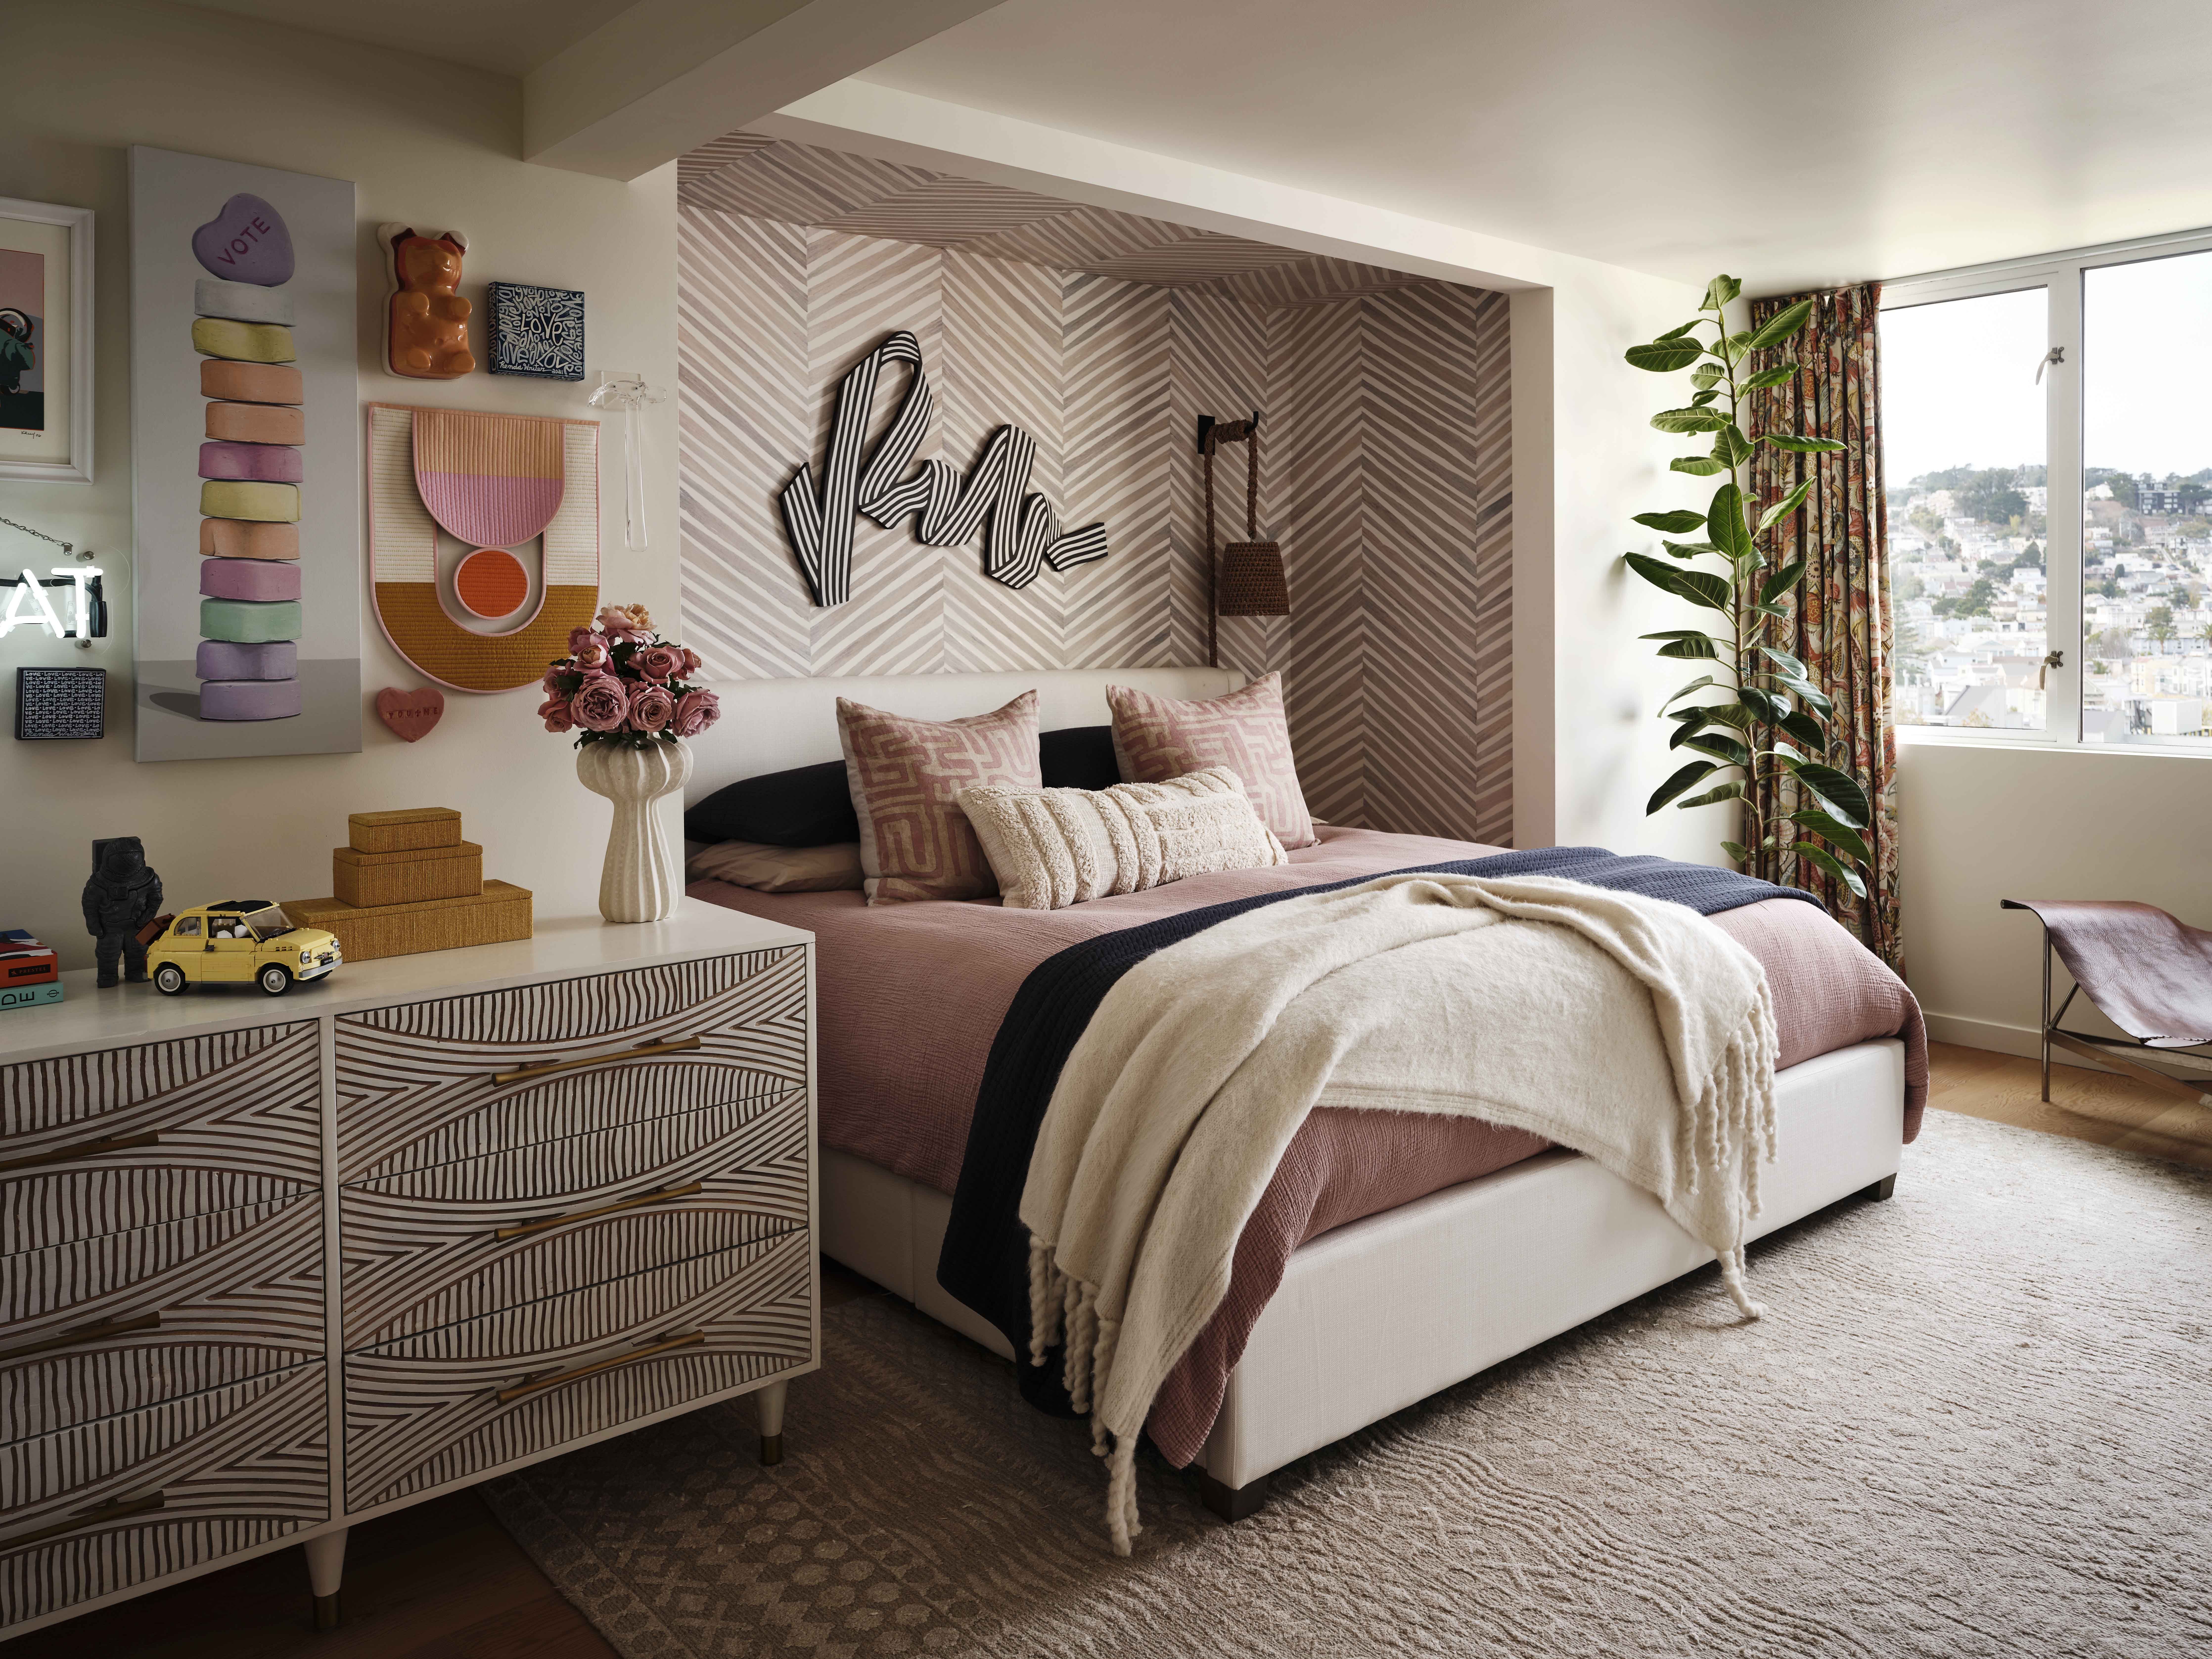 10 Amazing Solutions to Decorate a Bedroom Without a Headboard – Crafted  Beds Ltd